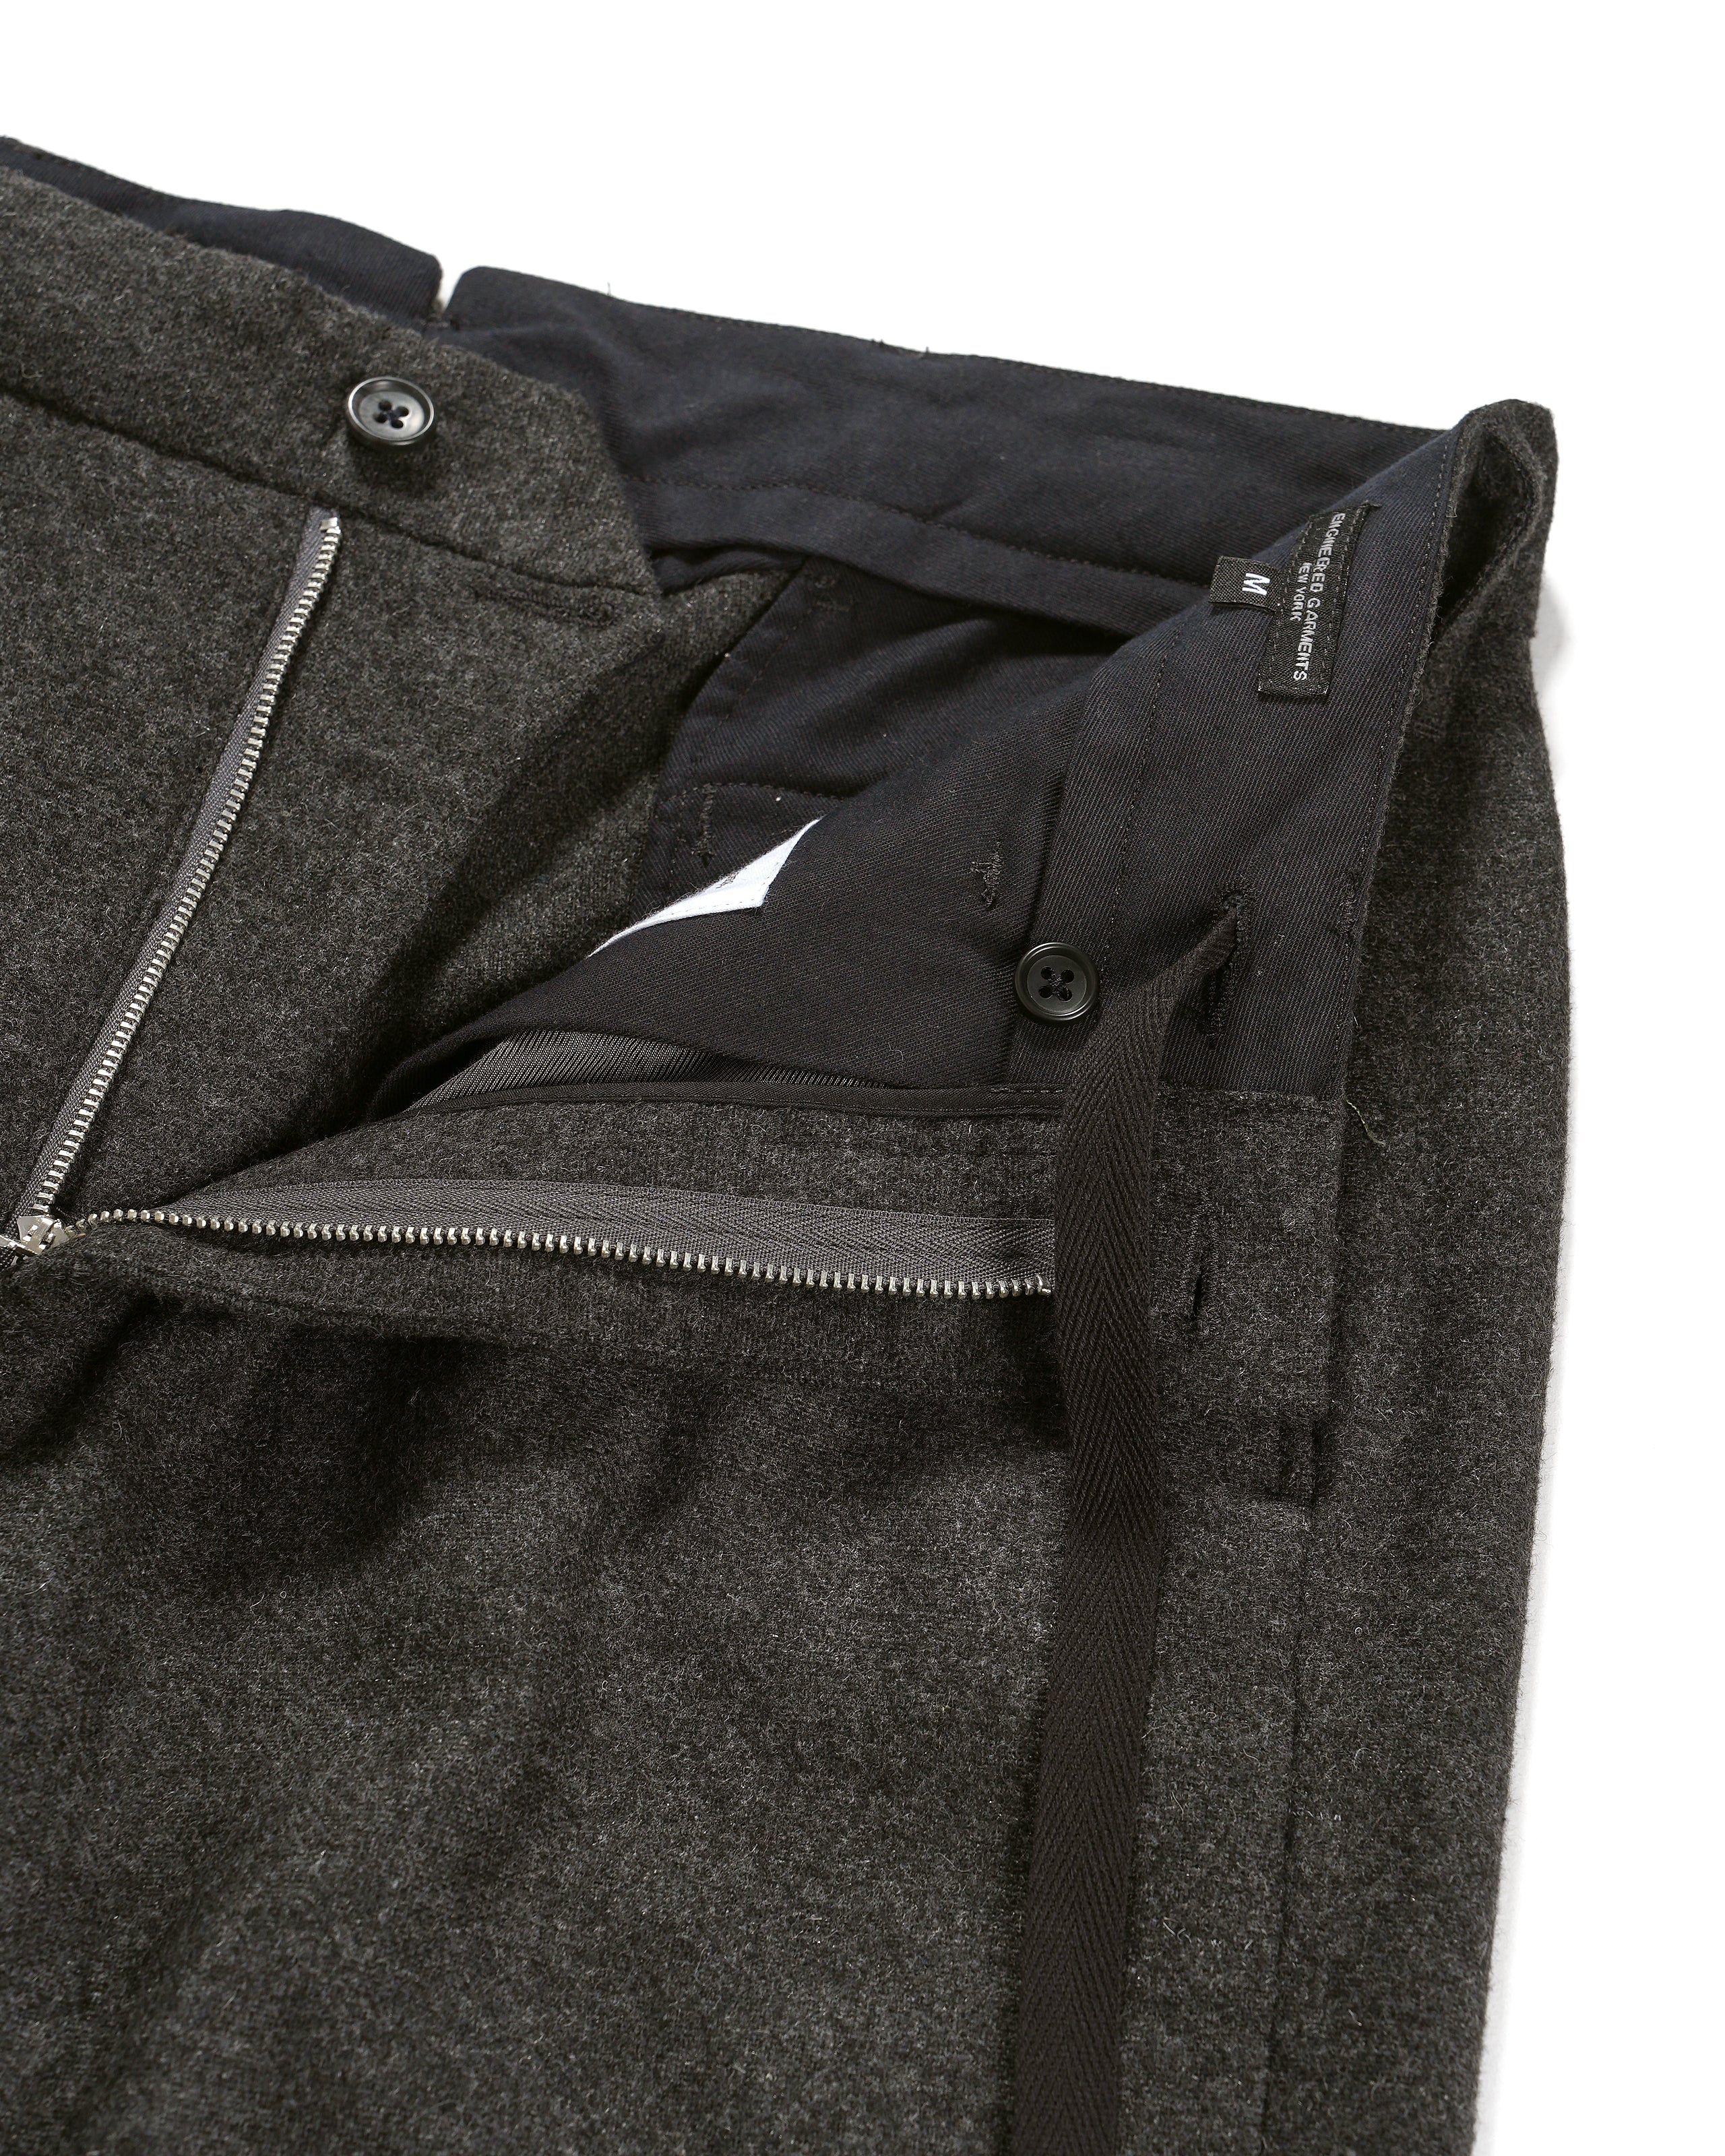 Andover Pant - Grey Solid Poly Wool Flannel